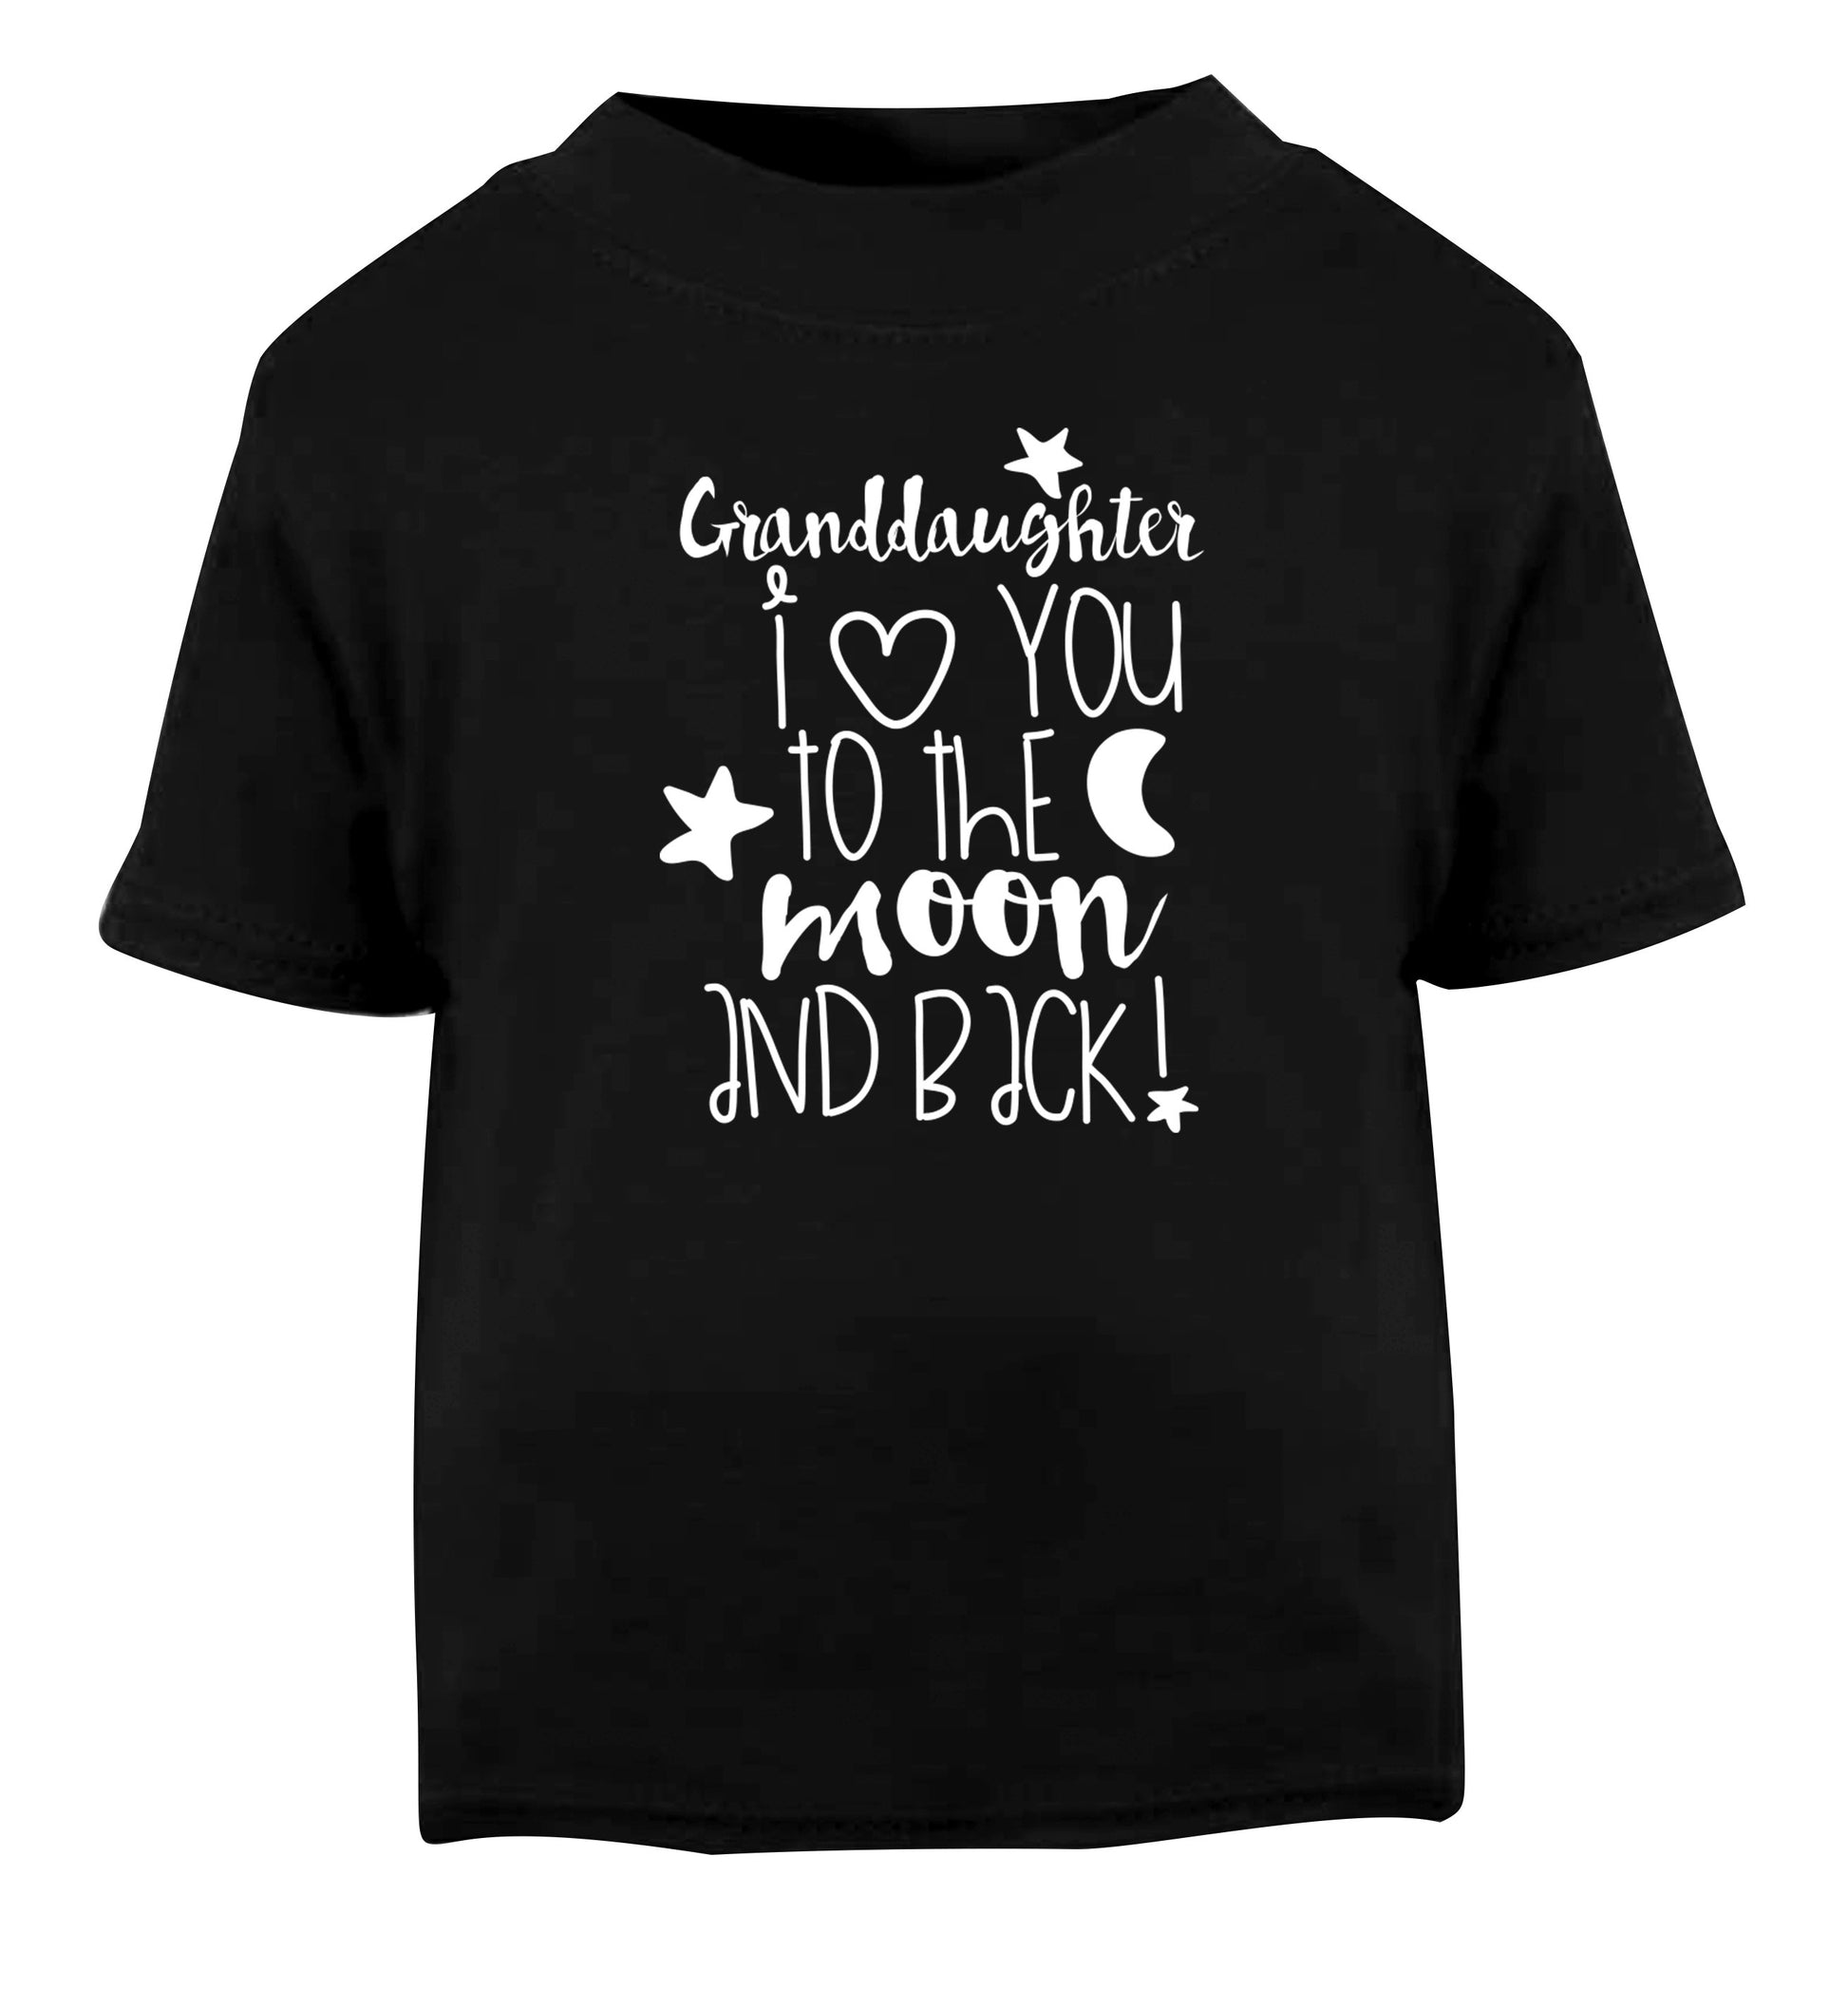 Granddaughter I love you to the moon and back Black Baby Toddler Tshirt 2 years